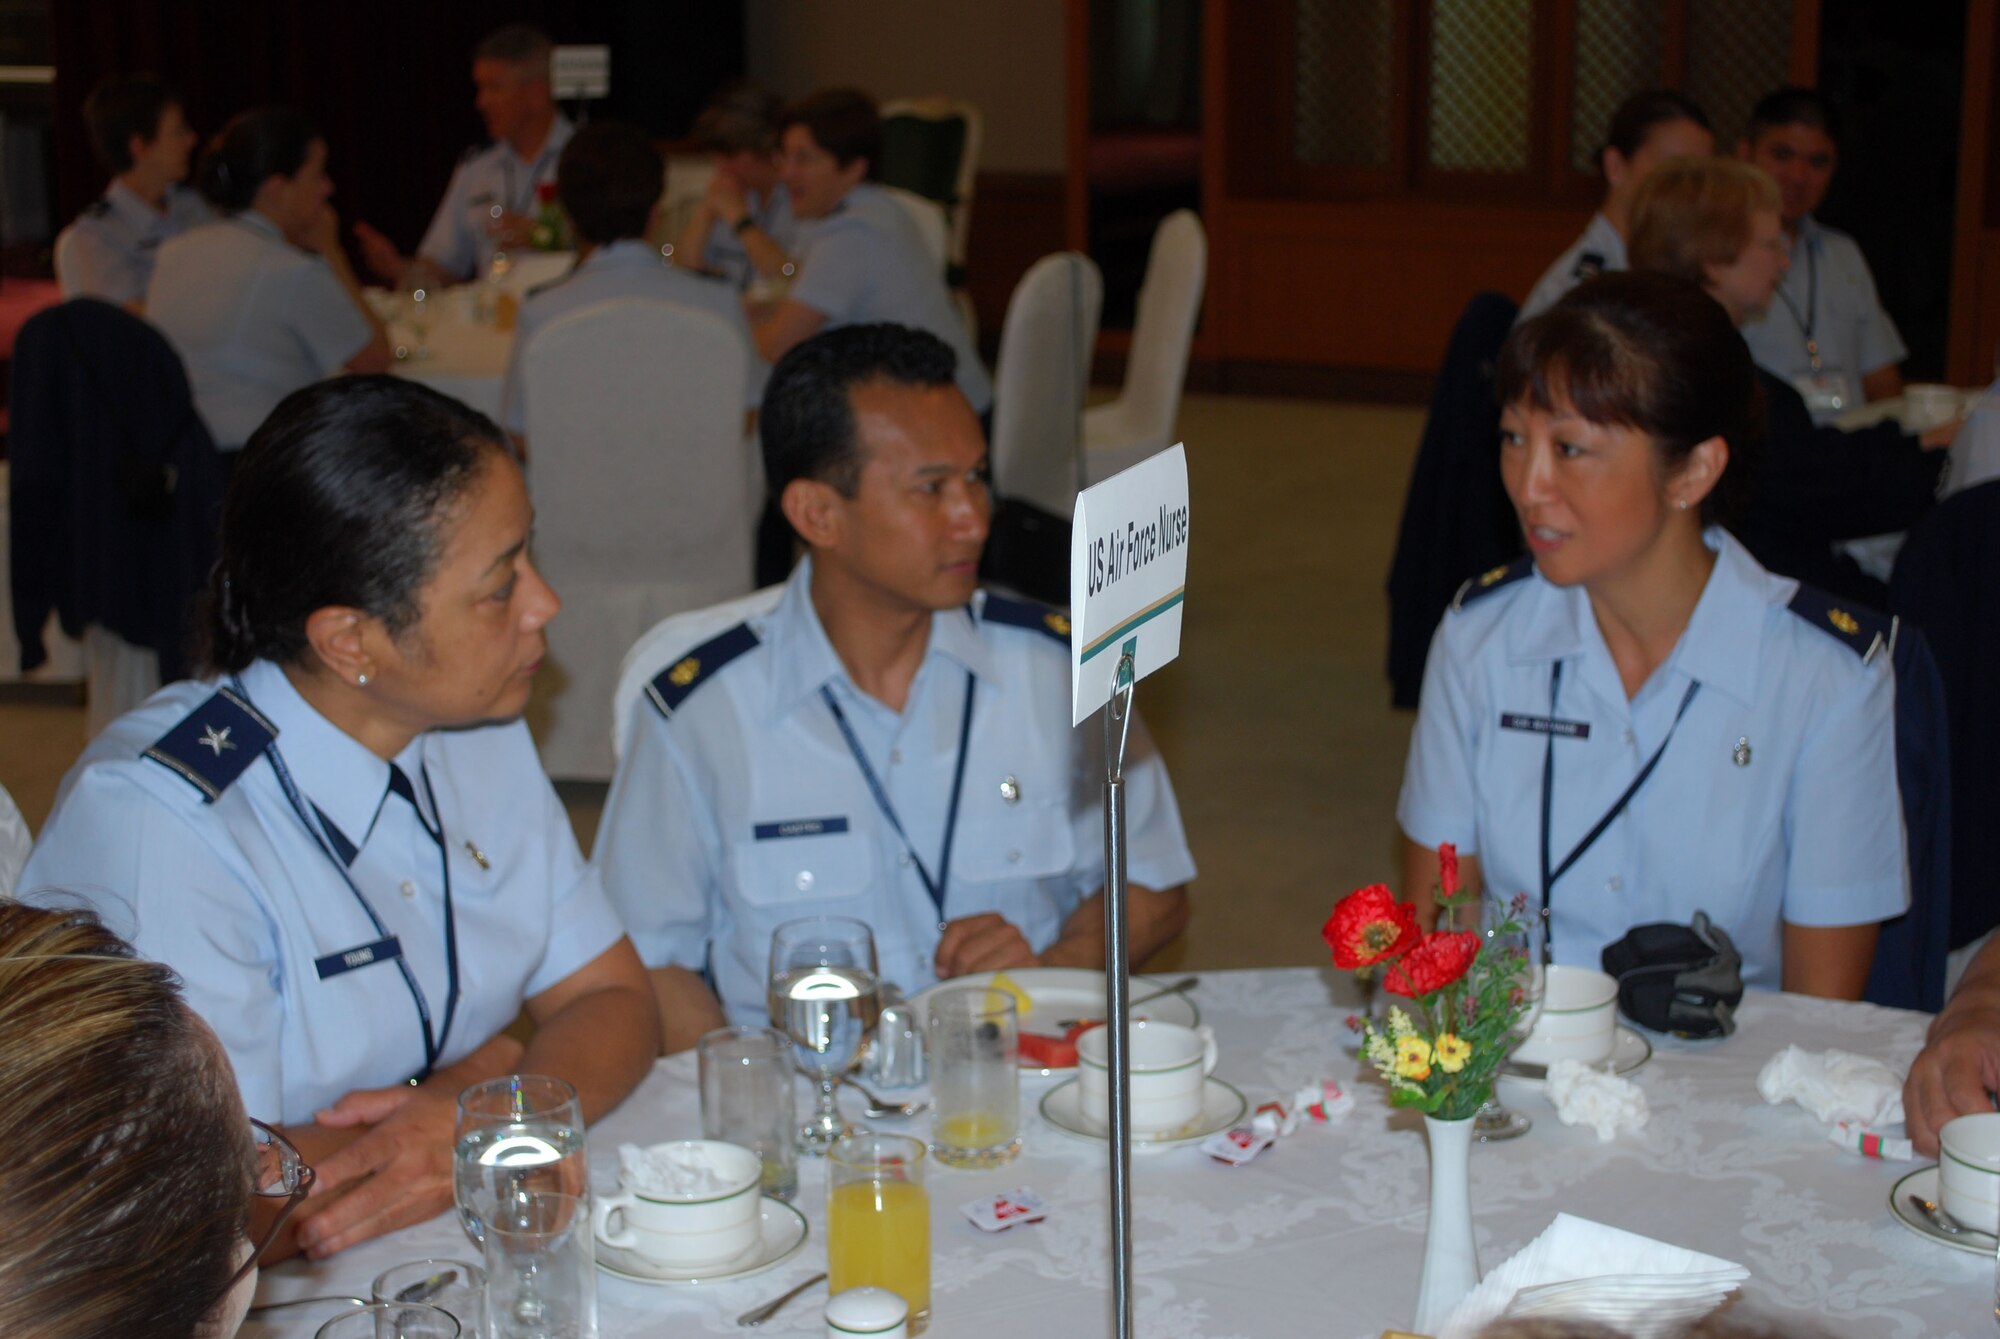 Brig. Gen Jan Young, Air National Guard Assistant to the USAF Assistant Surgeon General, Medical Force Development and Nursing Services, discusses medical issues with with Maj. Edilbert Castro and Maj. Jennifer Sur-Watanabe, Air Force Reserve nurses 624th Aeromedical Staging Squadron, at the second annual Asia Pacific Military Conference. Majors Castro and Sur-Watanabe were two of more than 40 Air Force, Army and Navy nurses and medical professionals who attended the conference with attendees from seven countries Sept. 1-5 at the Korea Armed Forces Nursing Academy in Daejeon, Republic of Korea. The 624th ASTS is part of the 624th Regional Support Group, Hickam Air Force Base, Hawaii.